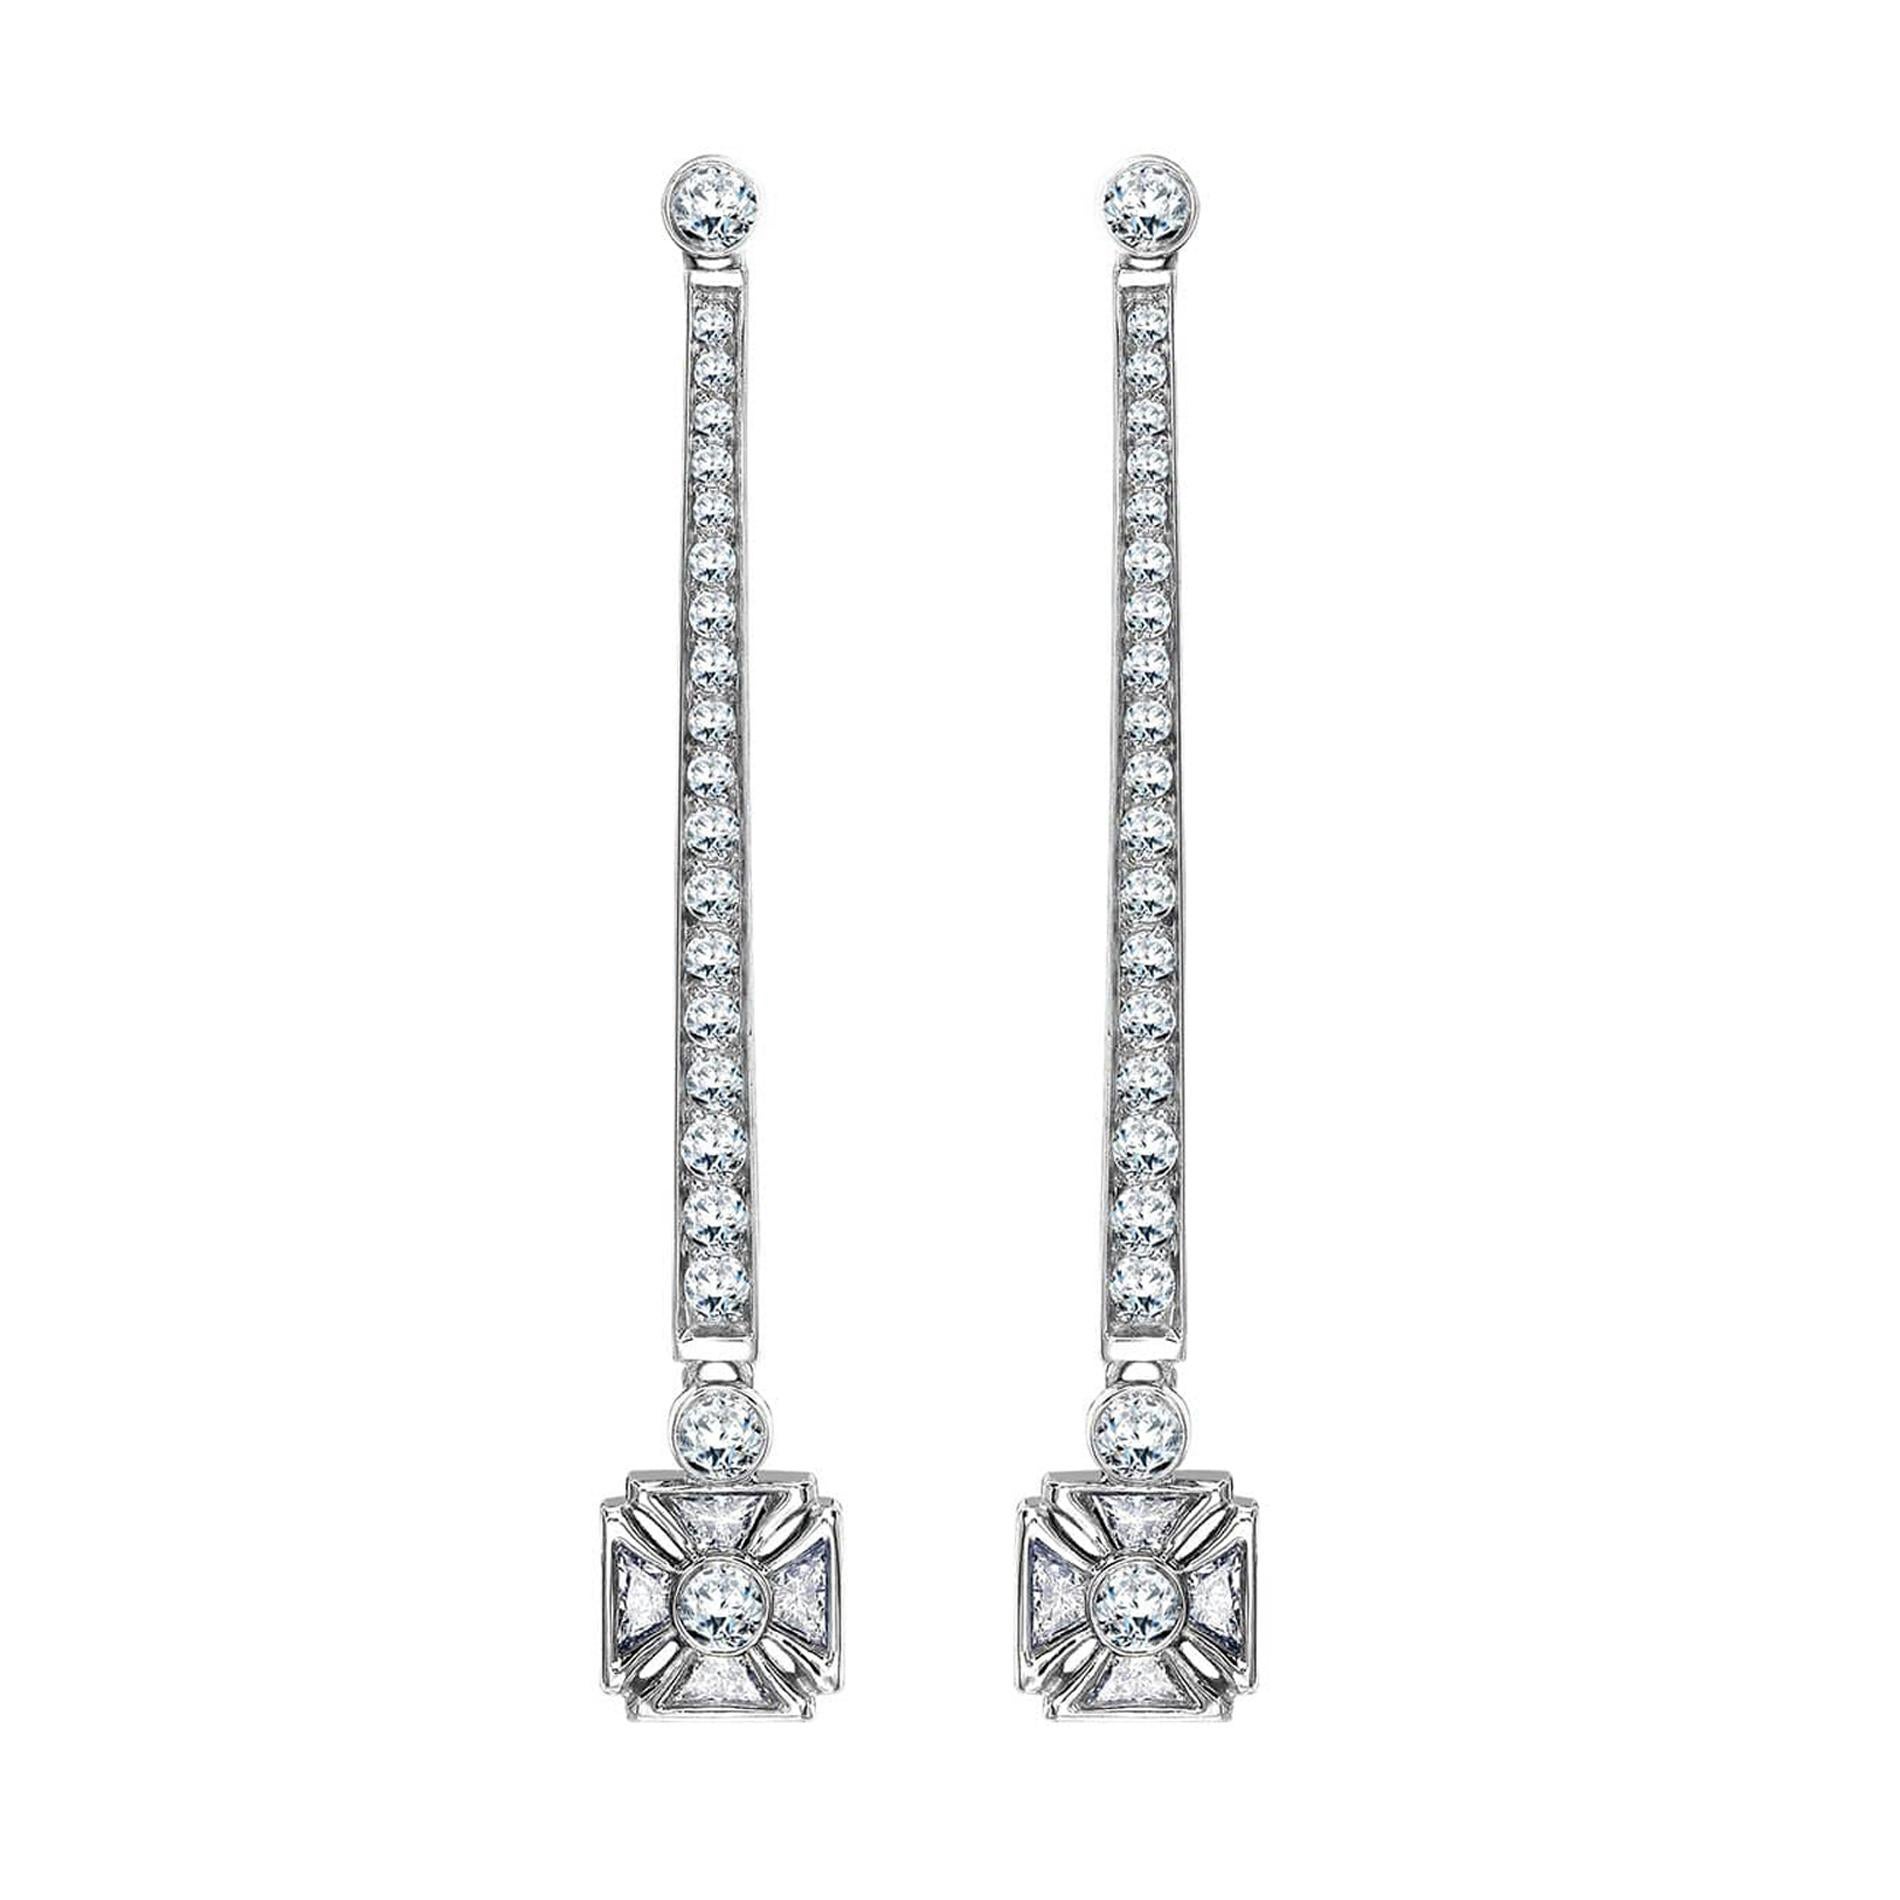 Sybarite Royal Jubilee Earrings in White Gold with White Diamonds For Sale